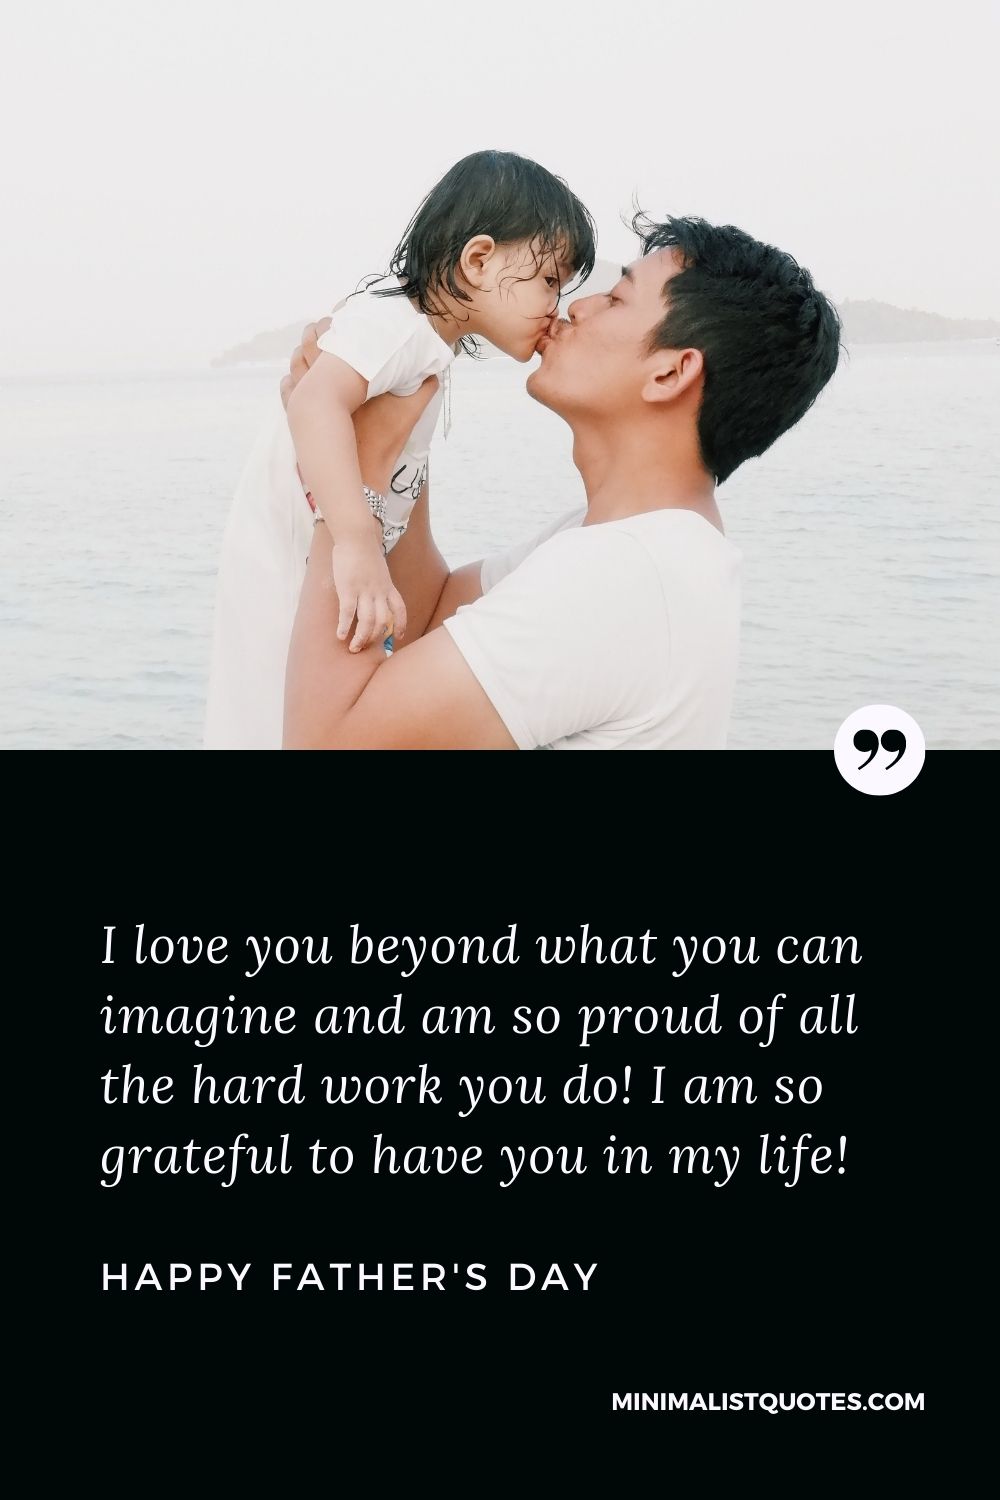 Father's Day wish, message & quote with HD image: I love you beyond what you can imagine and am so proud of all the hard work you do! I am so grateful to have you in my life. Happy Father's Day!